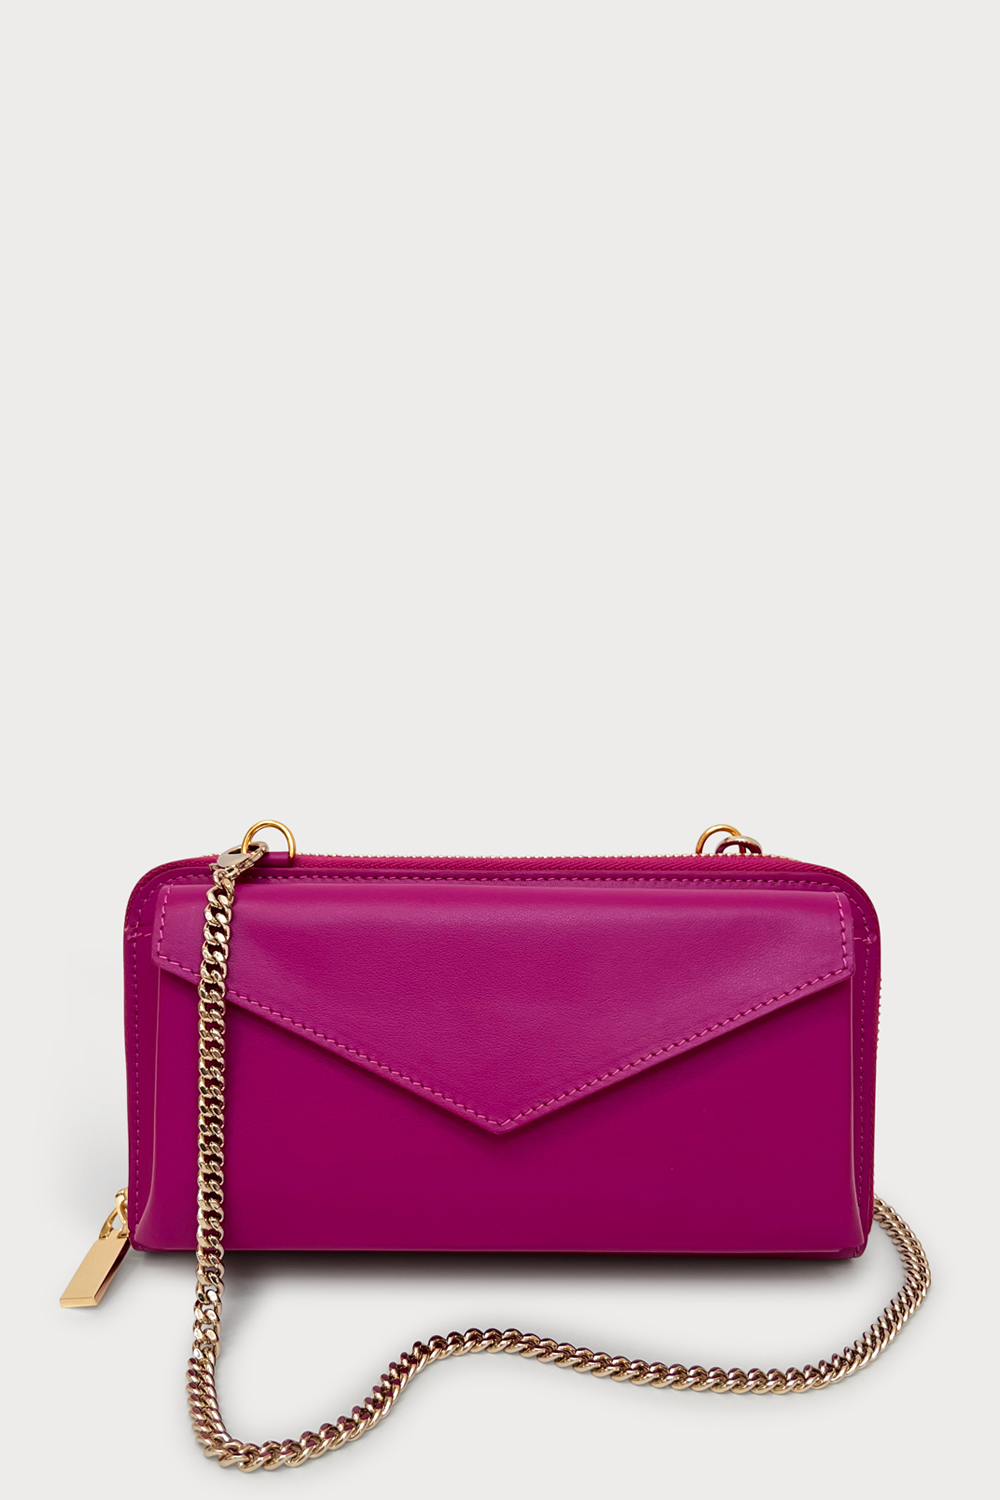 Mel Boteri | 'Himani' Wallet Clutch Bag With Detachable Cross-Body Strap | orchidea leather | Front View